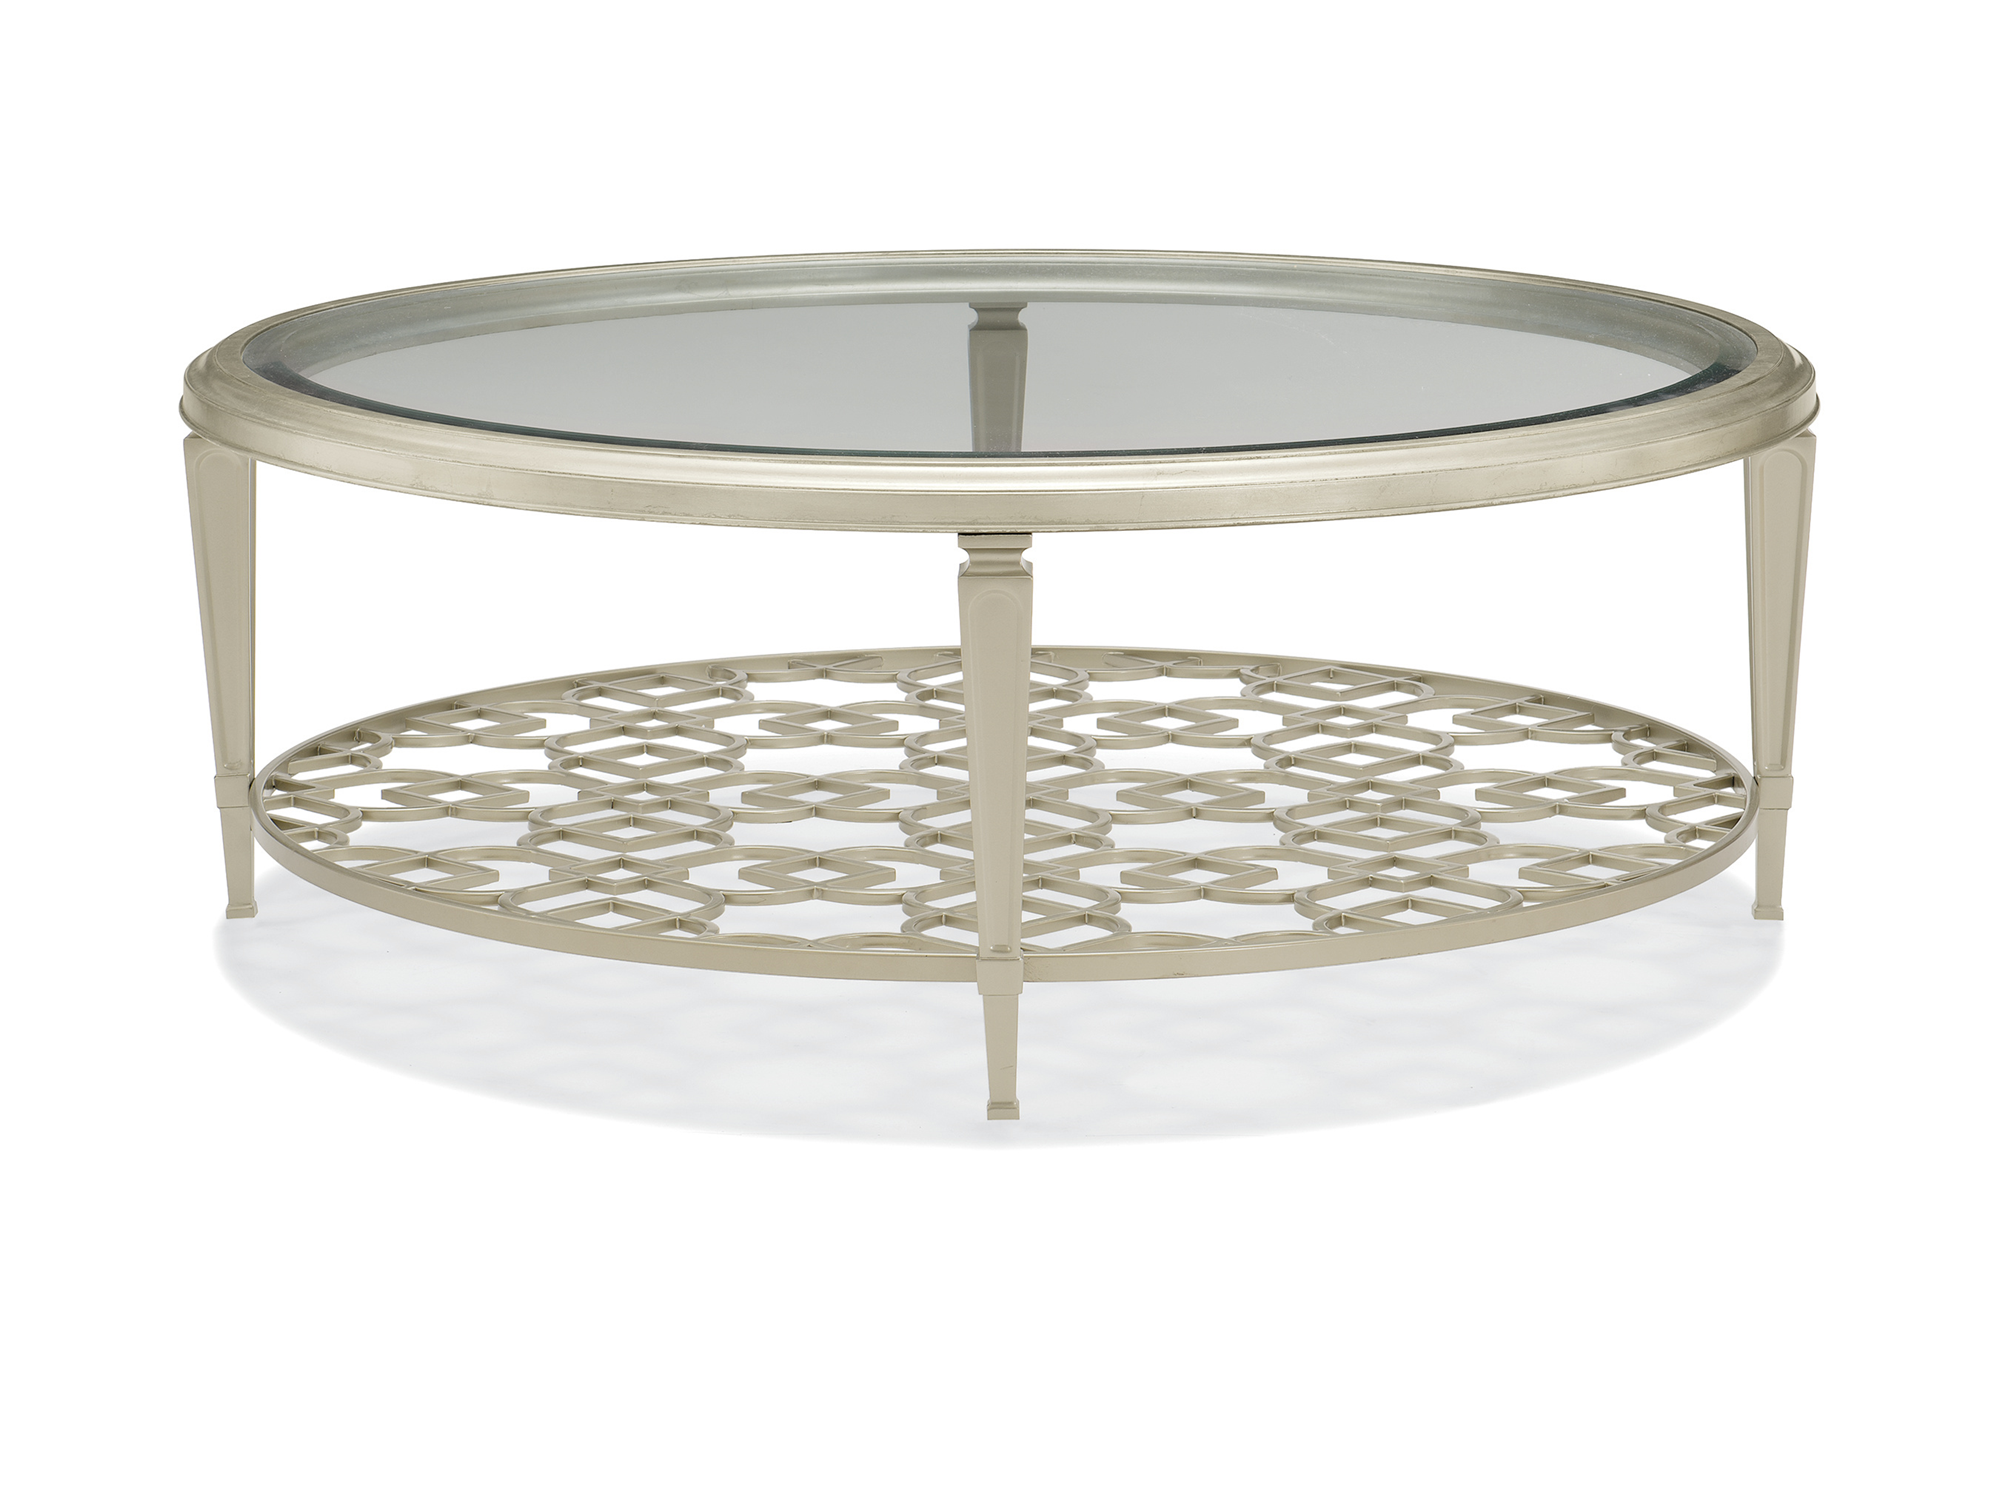 Babs Social Gathering Cocktail Table - Euro Living Furniture